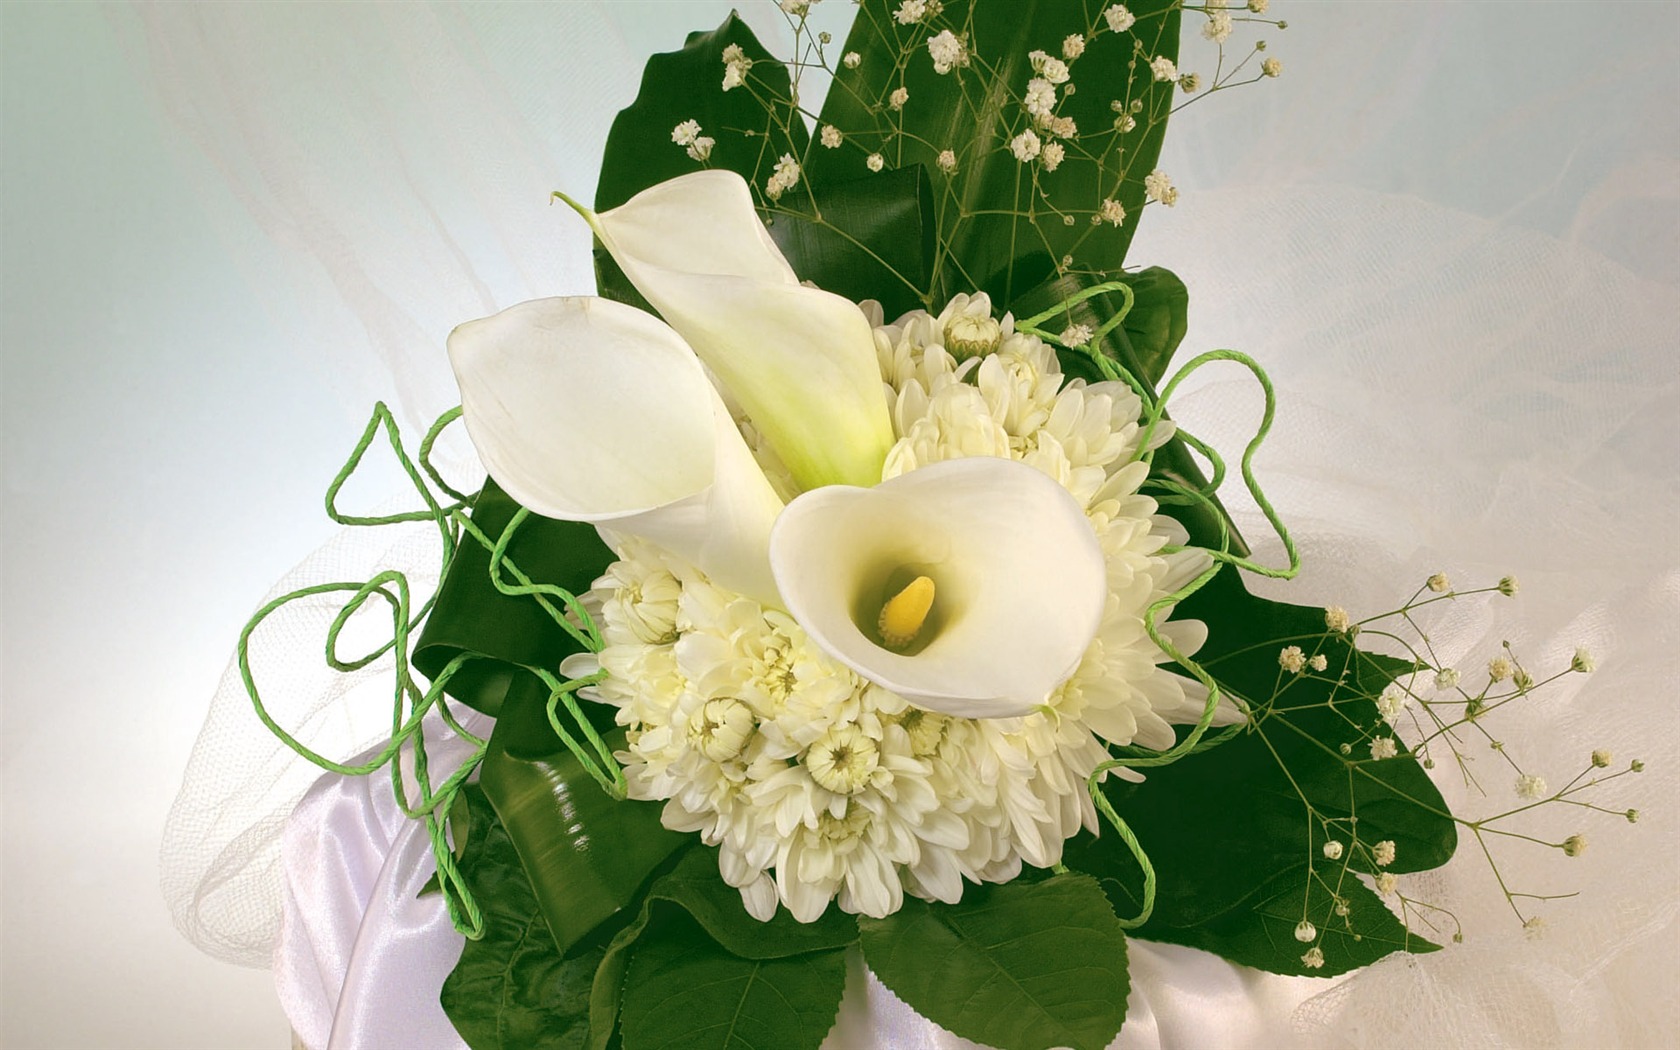 Weddings and Flowers wallpaper (1) #9 - 1680x1050